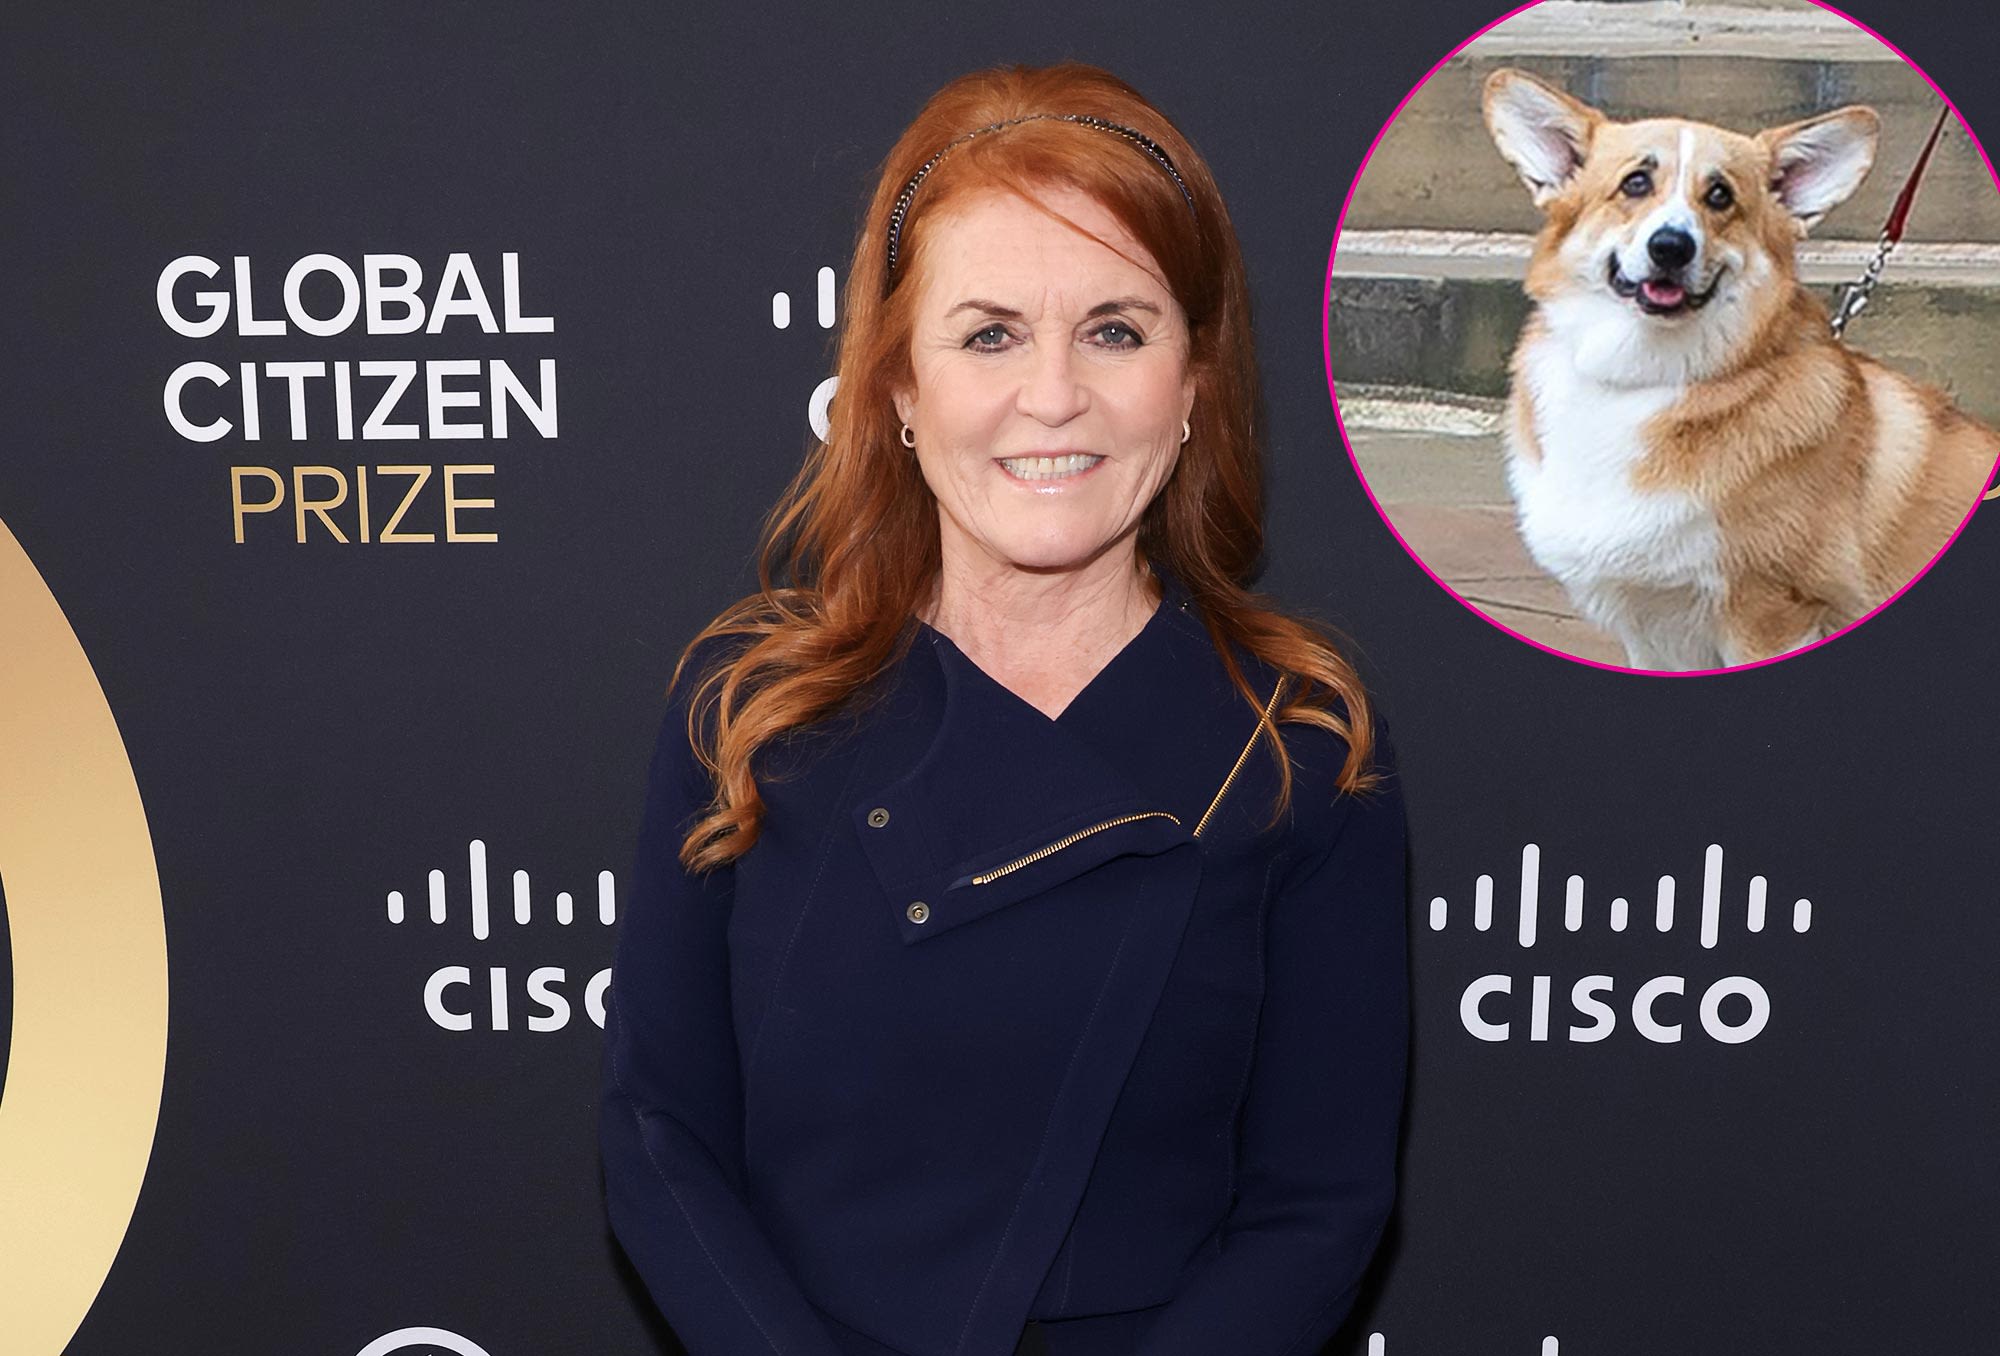 Sarah Ferguson Says Her and Queen Elizabeth II’s Dogs Are ‘Doing Very Well’ and All Get Along